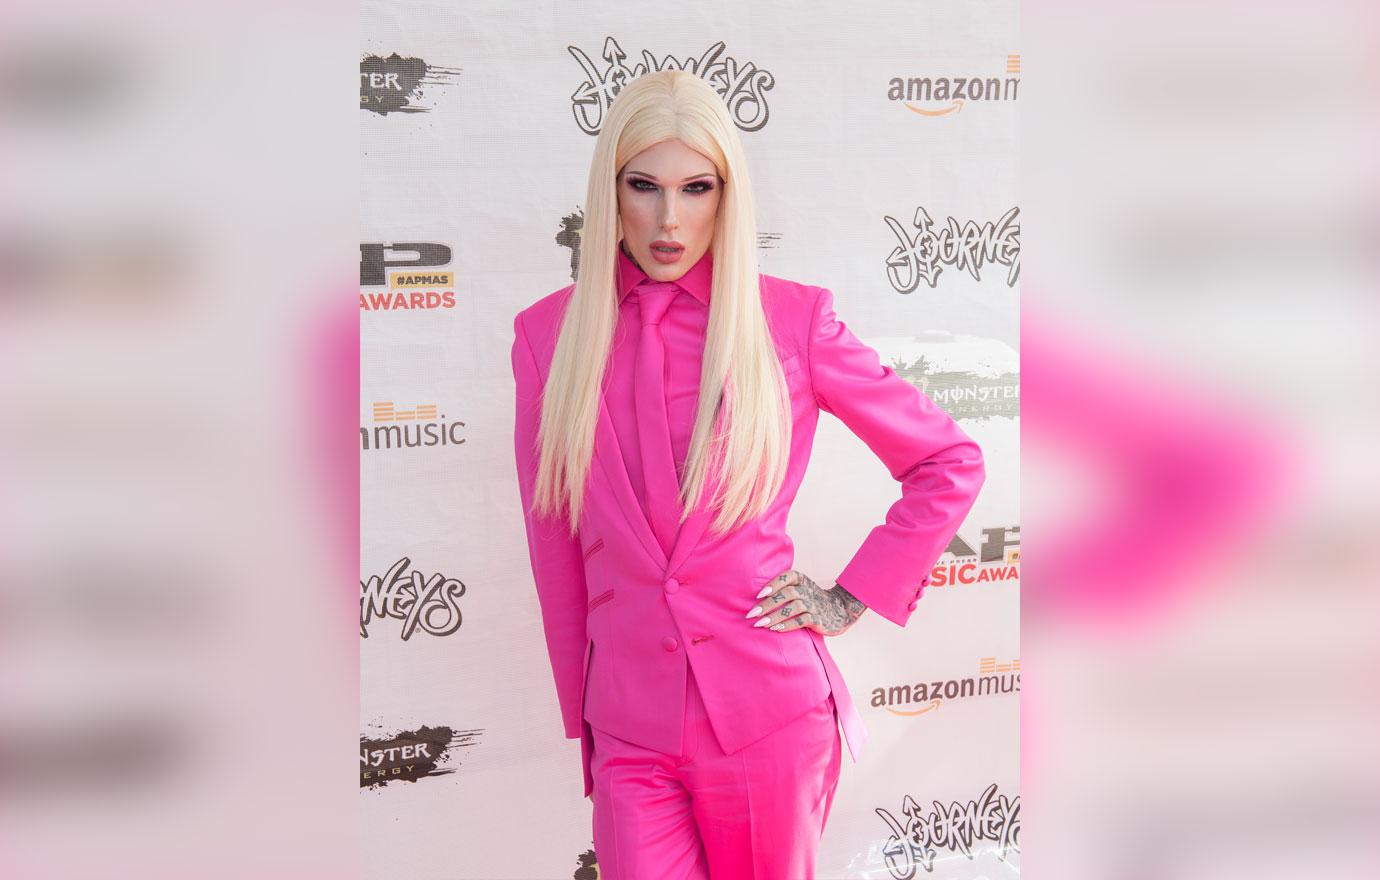 Jeffree Star's Fans Scramble To Uncover Who His 'NFL Boo' Is